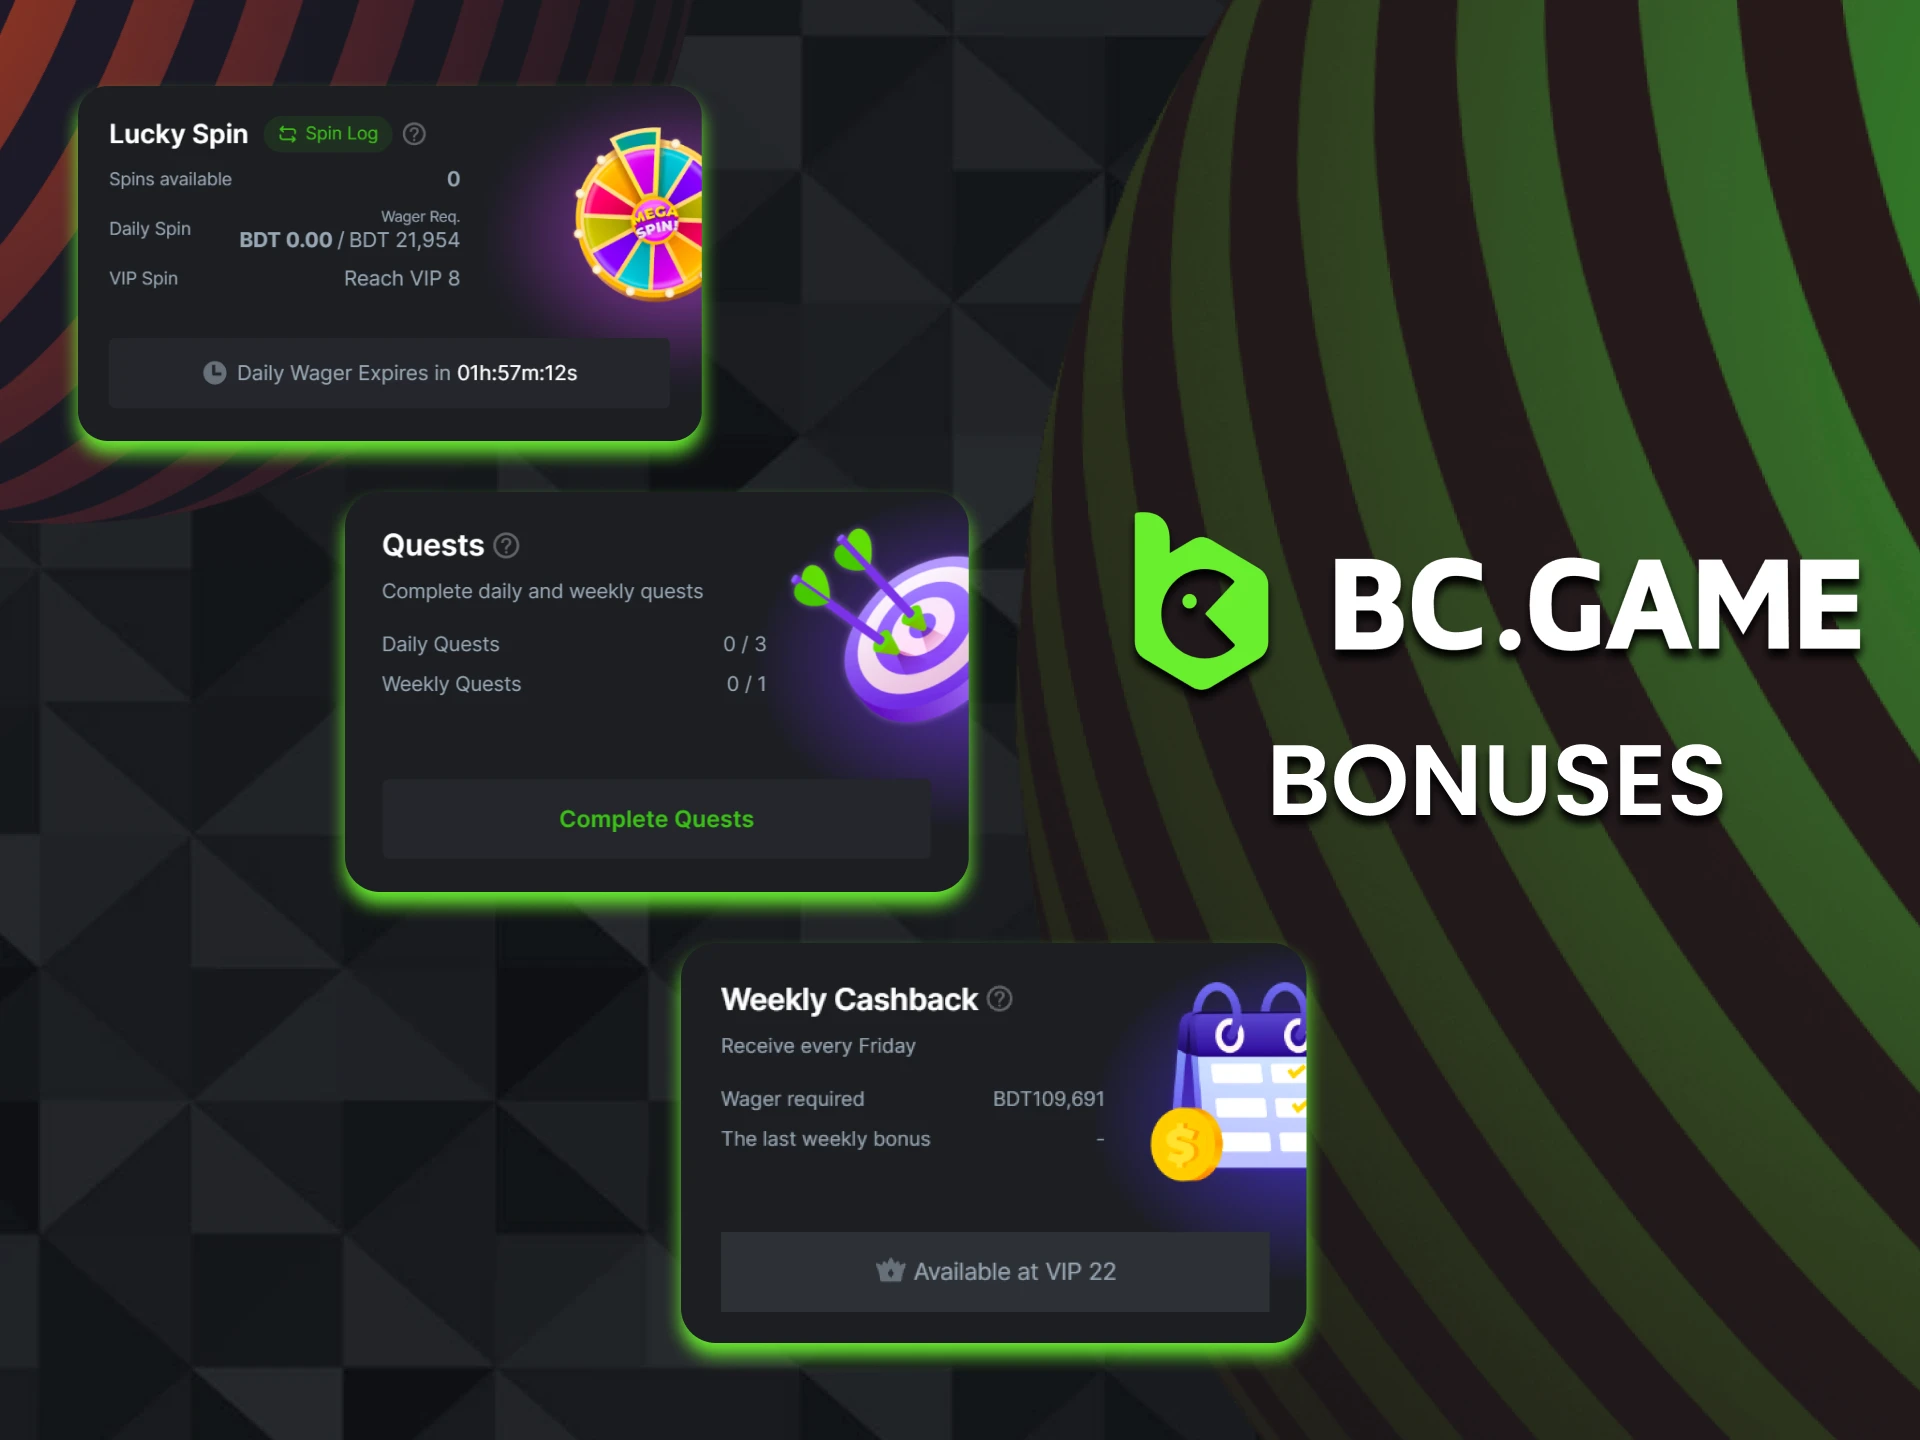 Use bonuses when playing in the Originals section on BC Game BD.